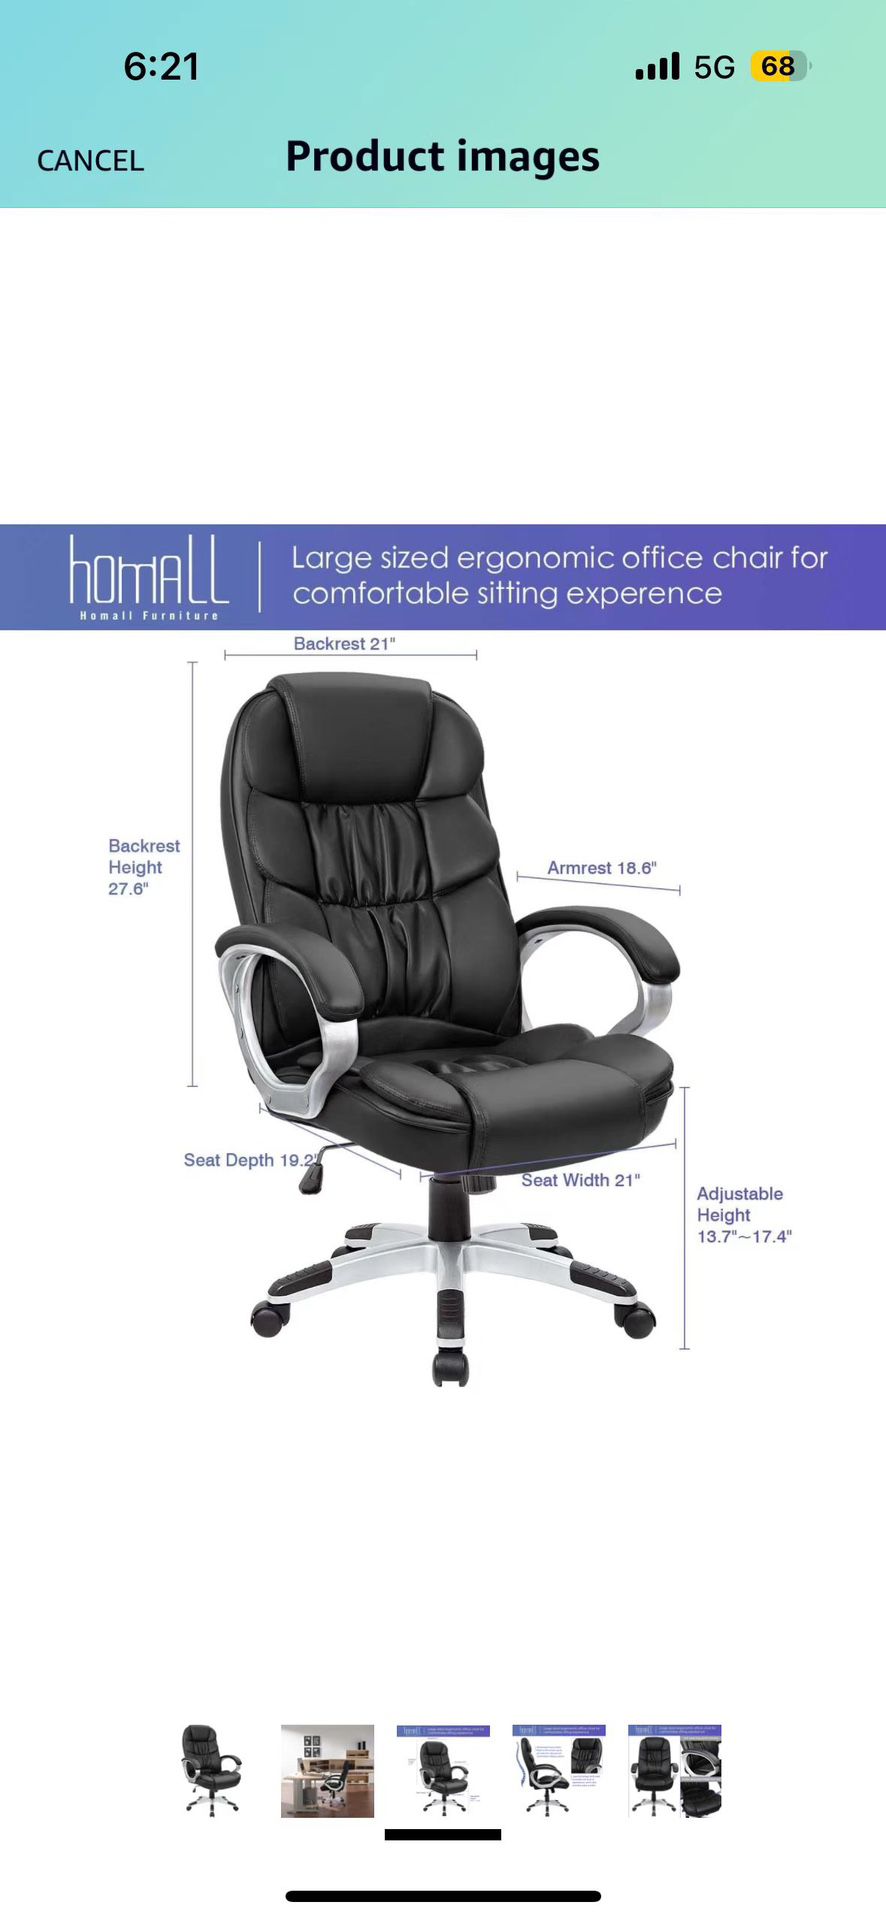 Office Chair High Back Computer Desk Chair, PU Leather Adjustable Height Modern Executive Swivel Task Chair with Padded Armrests and Lumbar Support (B